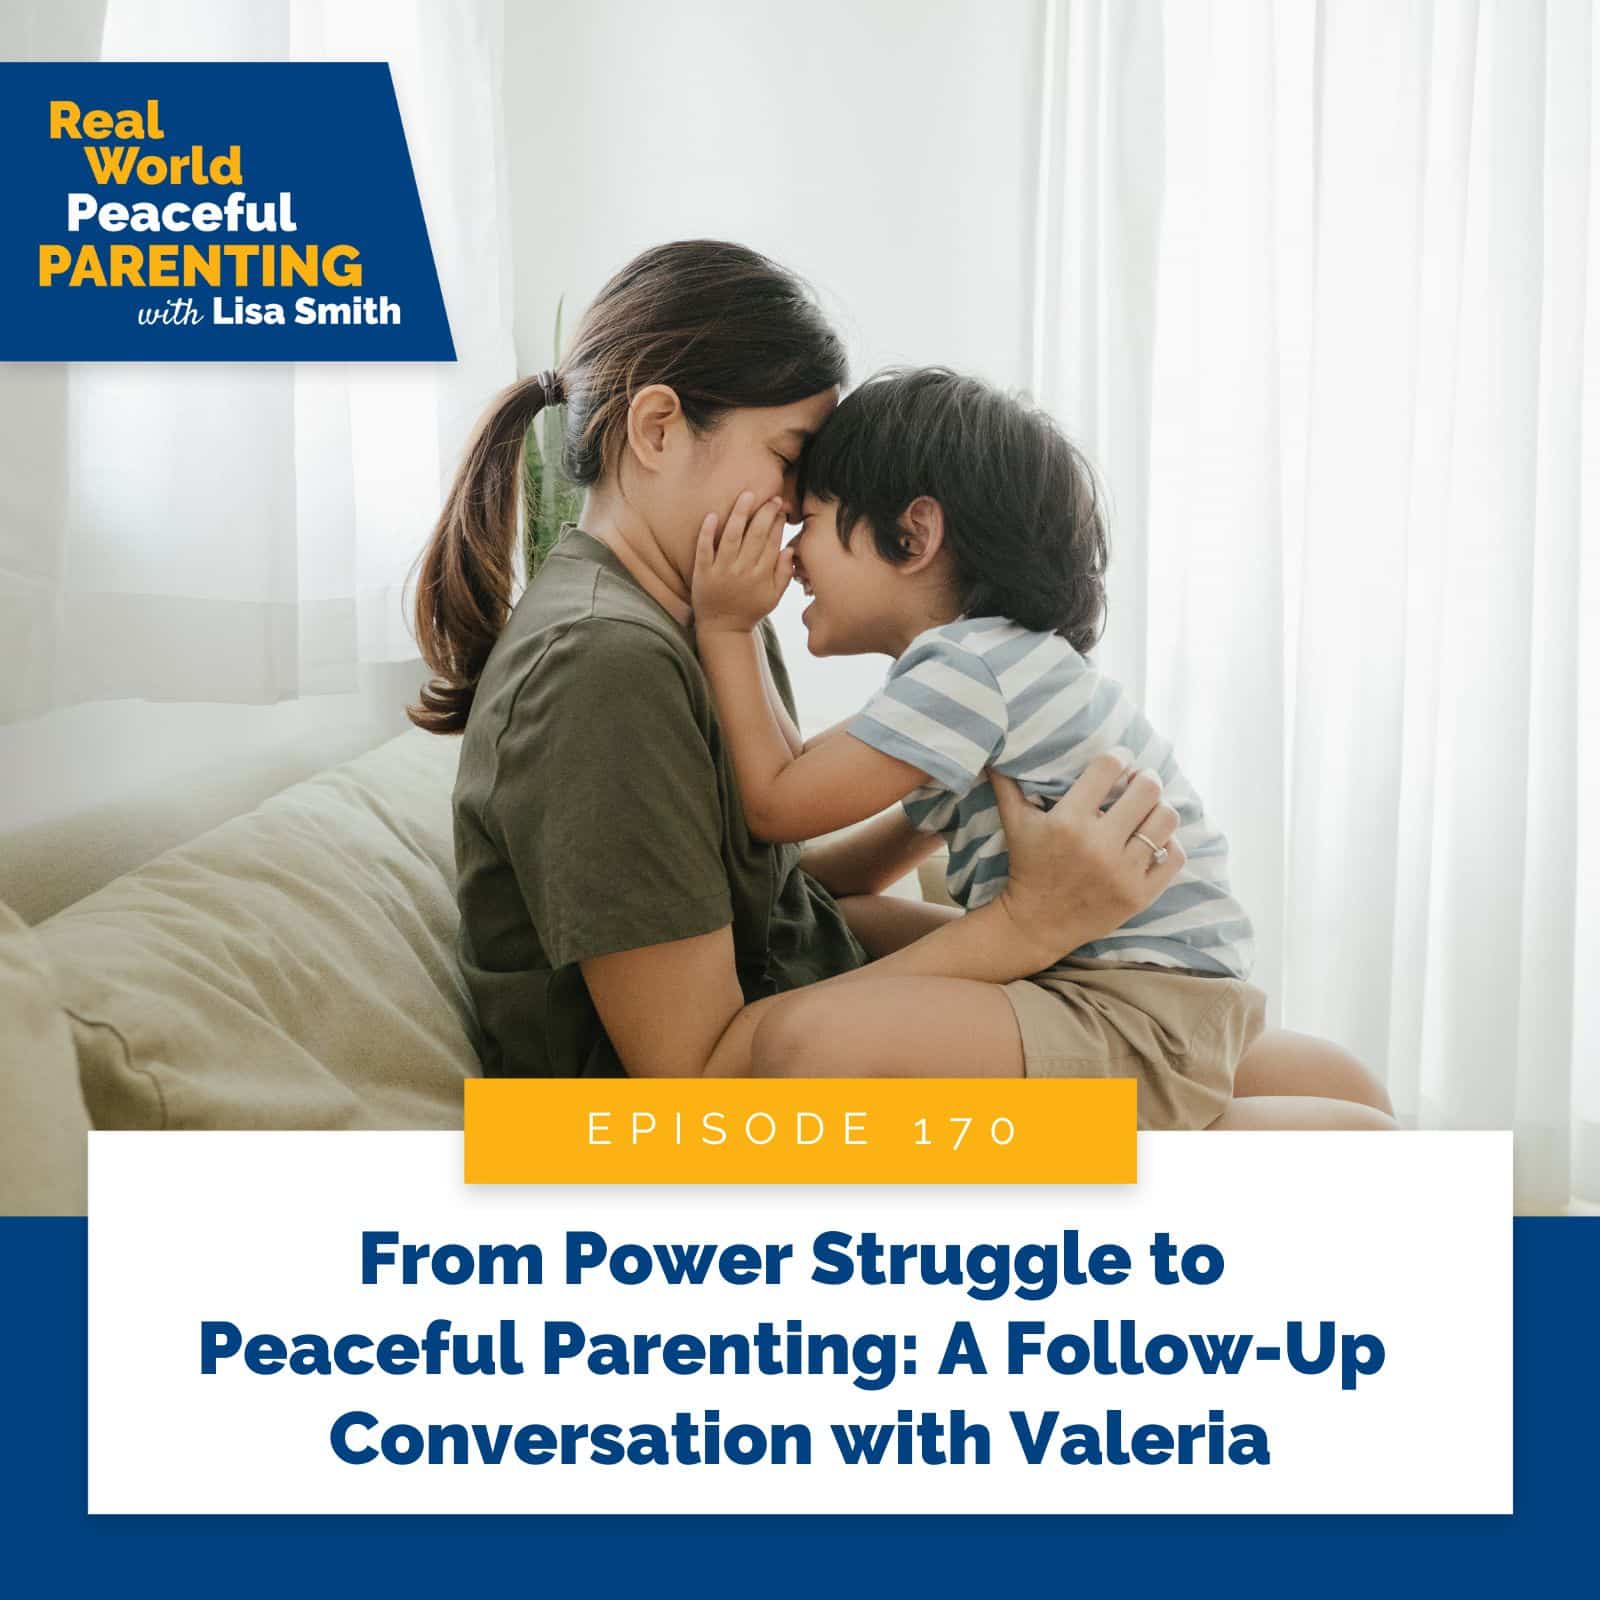 Real World Peaceful Parenting with Lisa Smith | From Power Struggle to Peaceful Parenting: A Follow-Up Conversation with Valeria